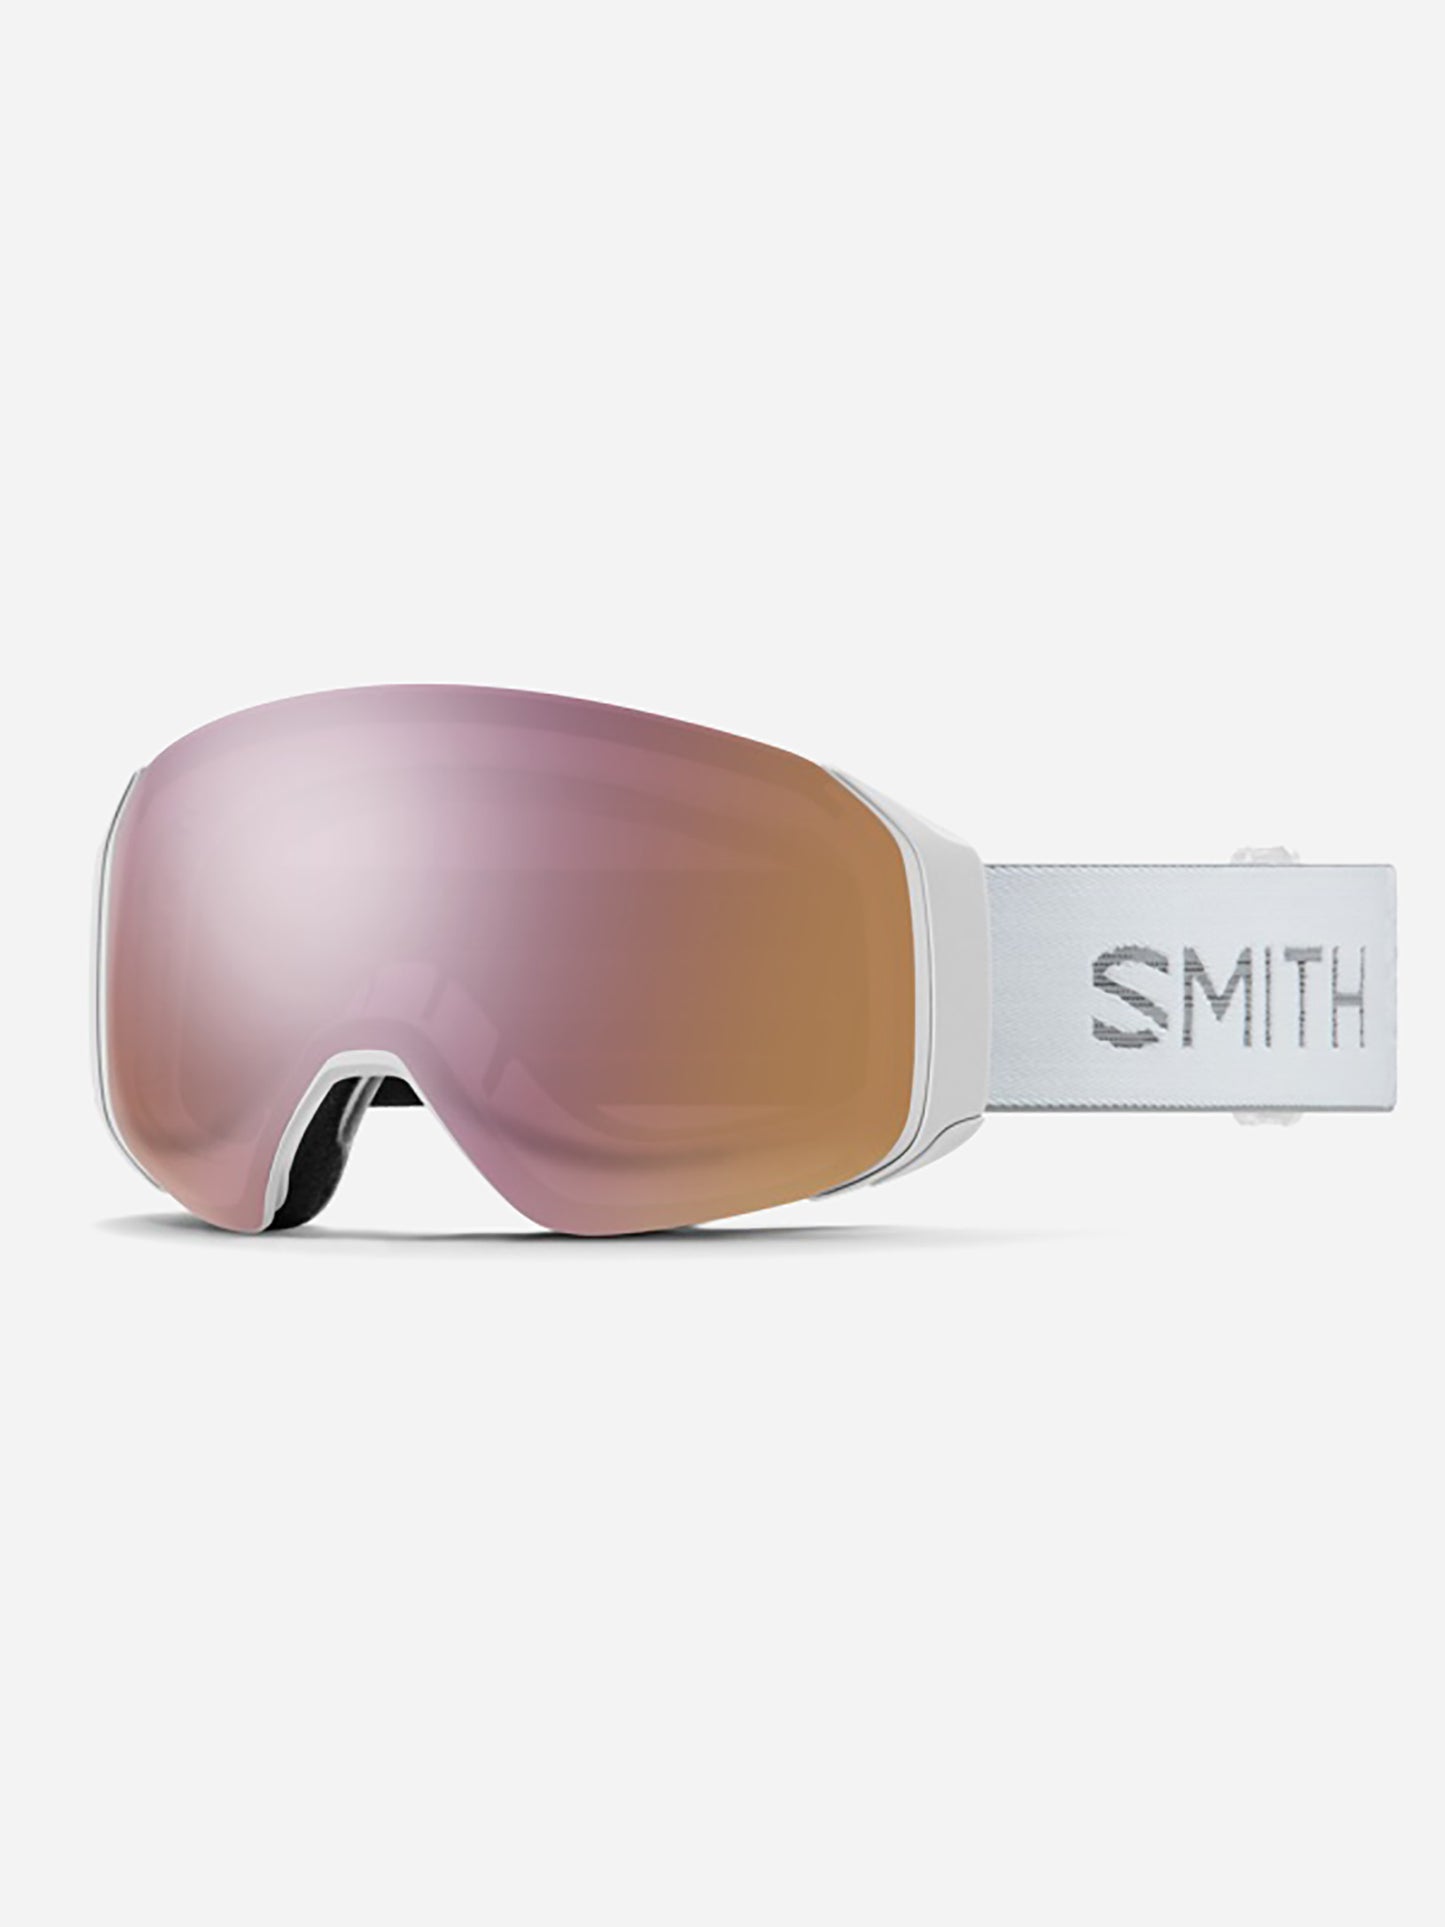 Smith 4D MAG S Women's Snow Goggle